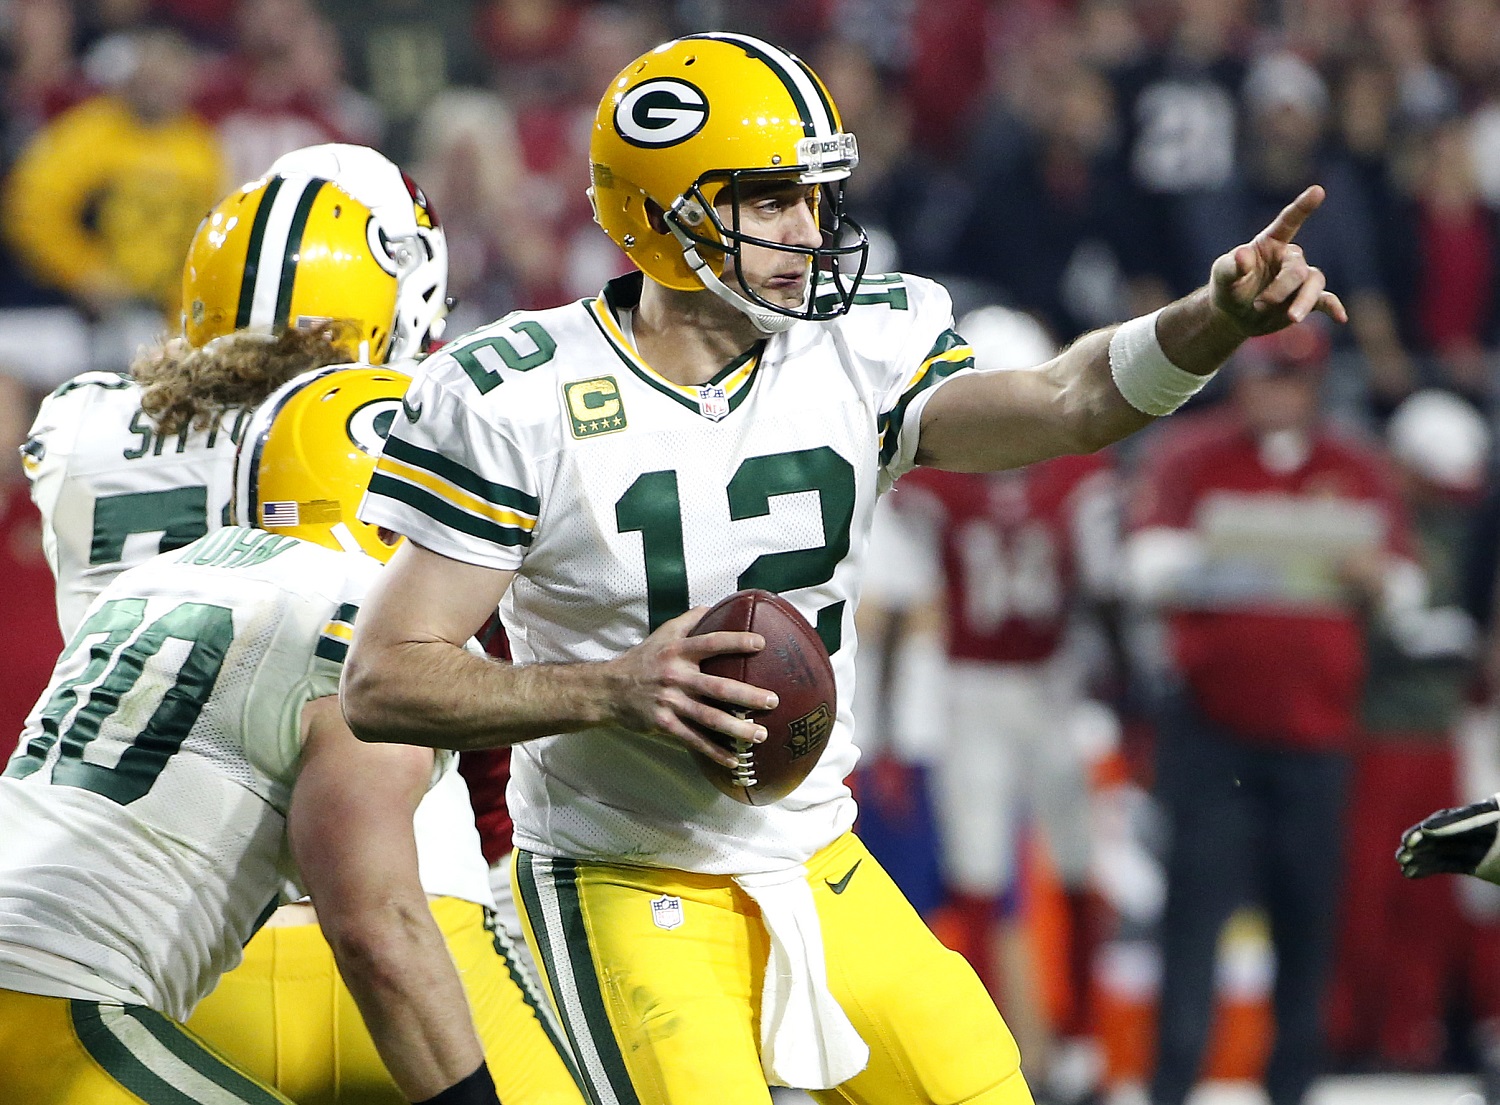 Green Bay Packers quarterback Aaron Rodgers (12) points to a receiver during the second half of an NFL divisional playoff football game against the Arizona Cardinals, Saturday, Jan. 16, 2016, in Glendale, Ariz. (AP Photo/Ross D. Franklin)